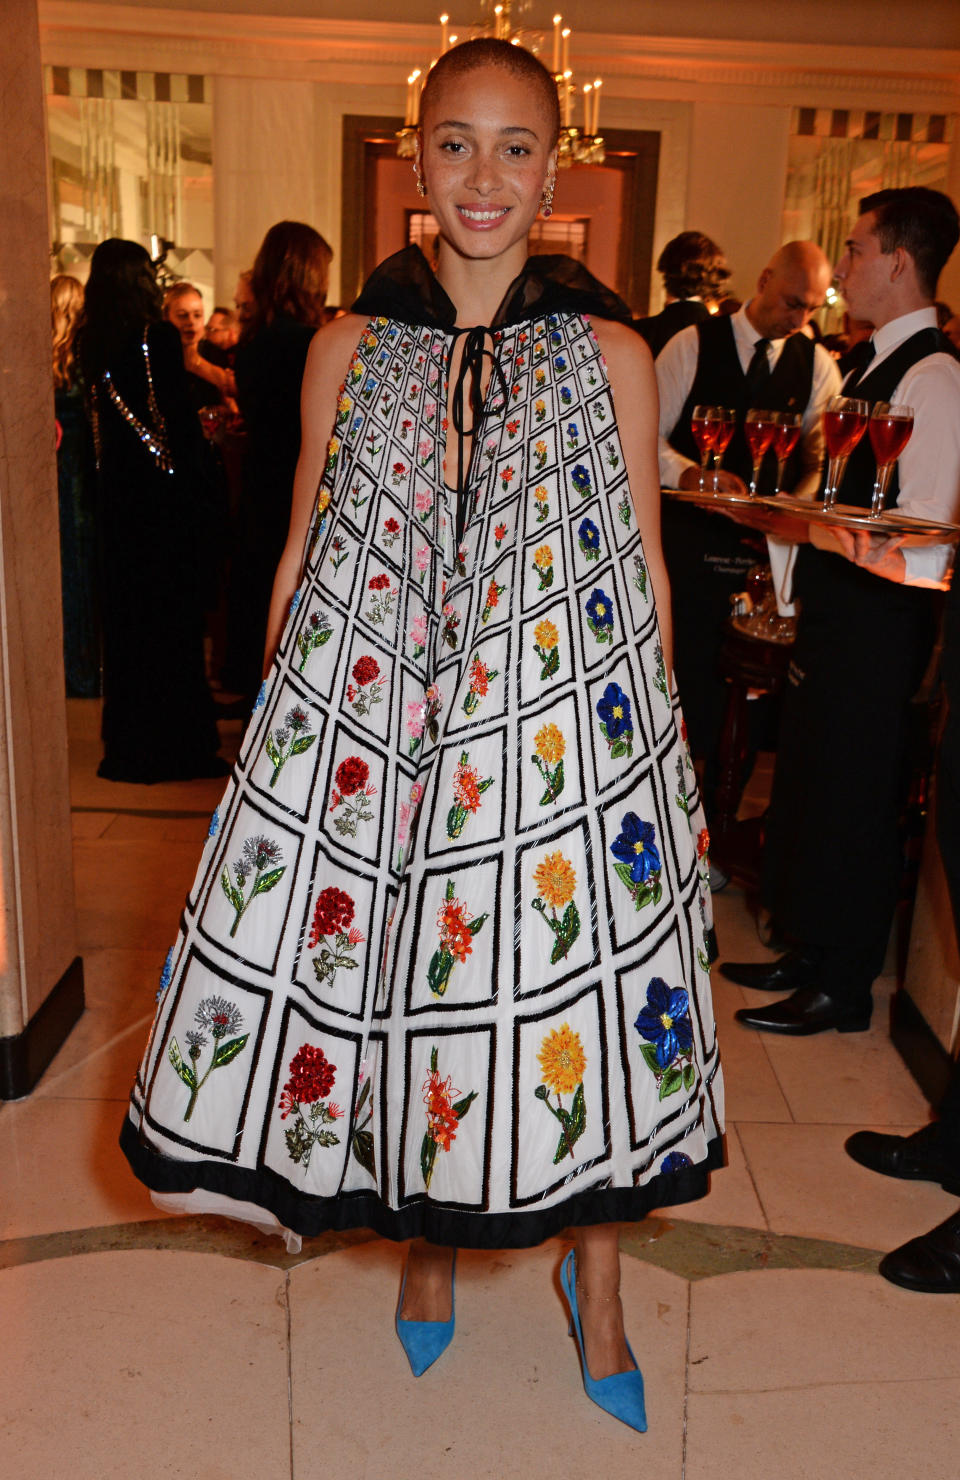 <p>The fashion model wore a one-of-a-kind <span>Mary Katrantzou gown paired with bright blue heels for the Claridge’s event. </span><em>[Photo: Getty]</em> </p>